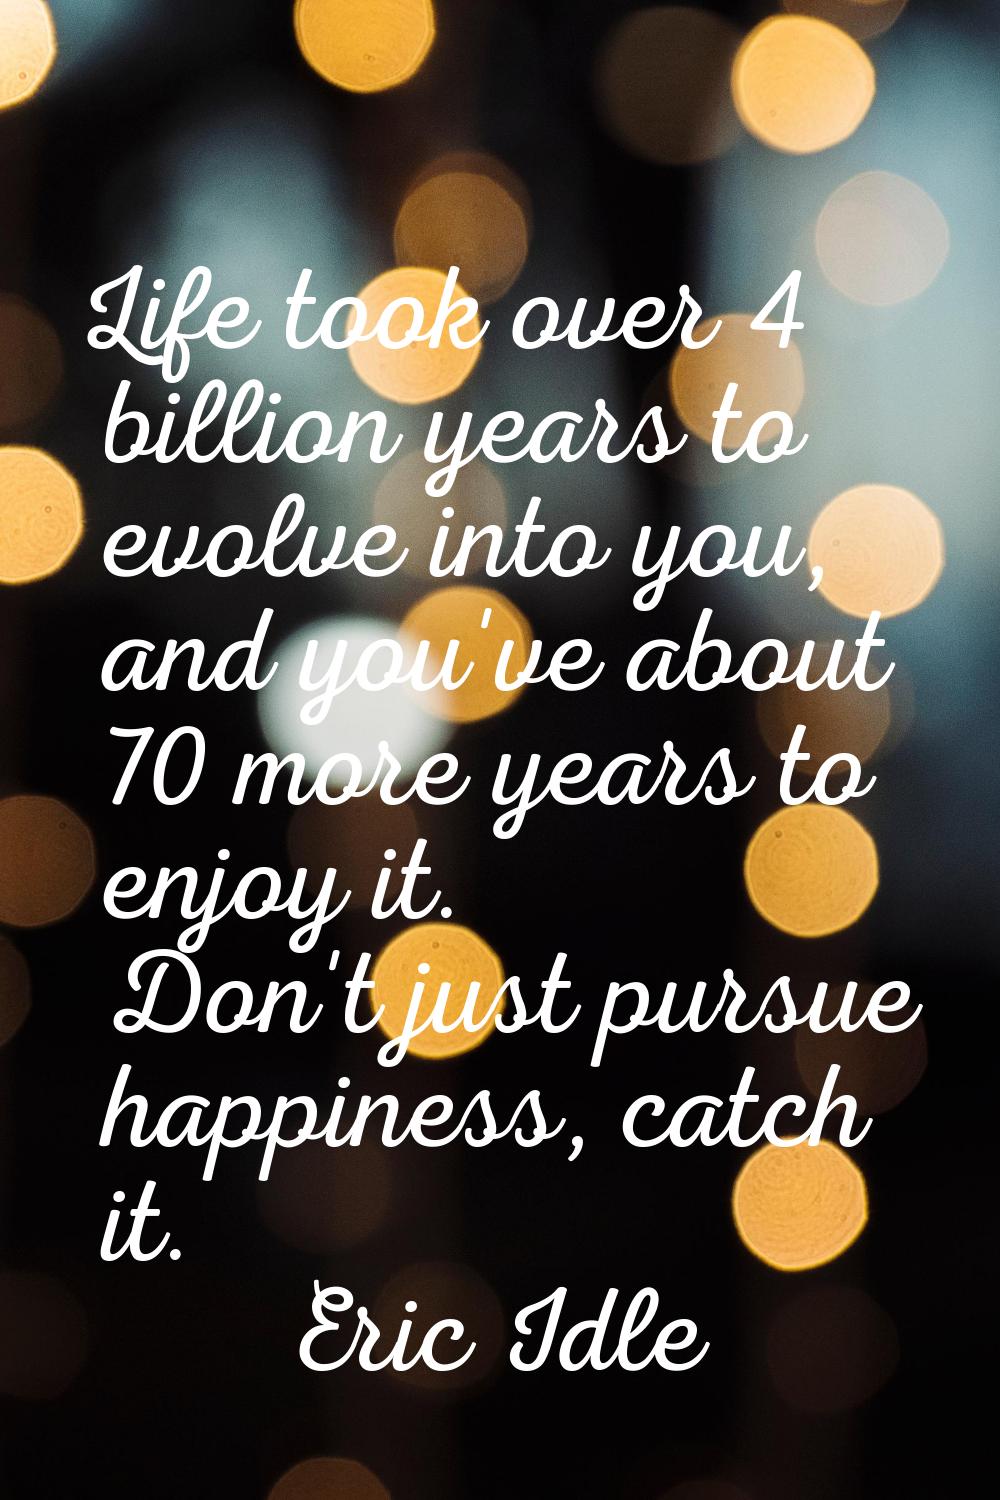 Life took over 4 billion years to evolve into you, and you've about 70 more years to enjoy it. Don'